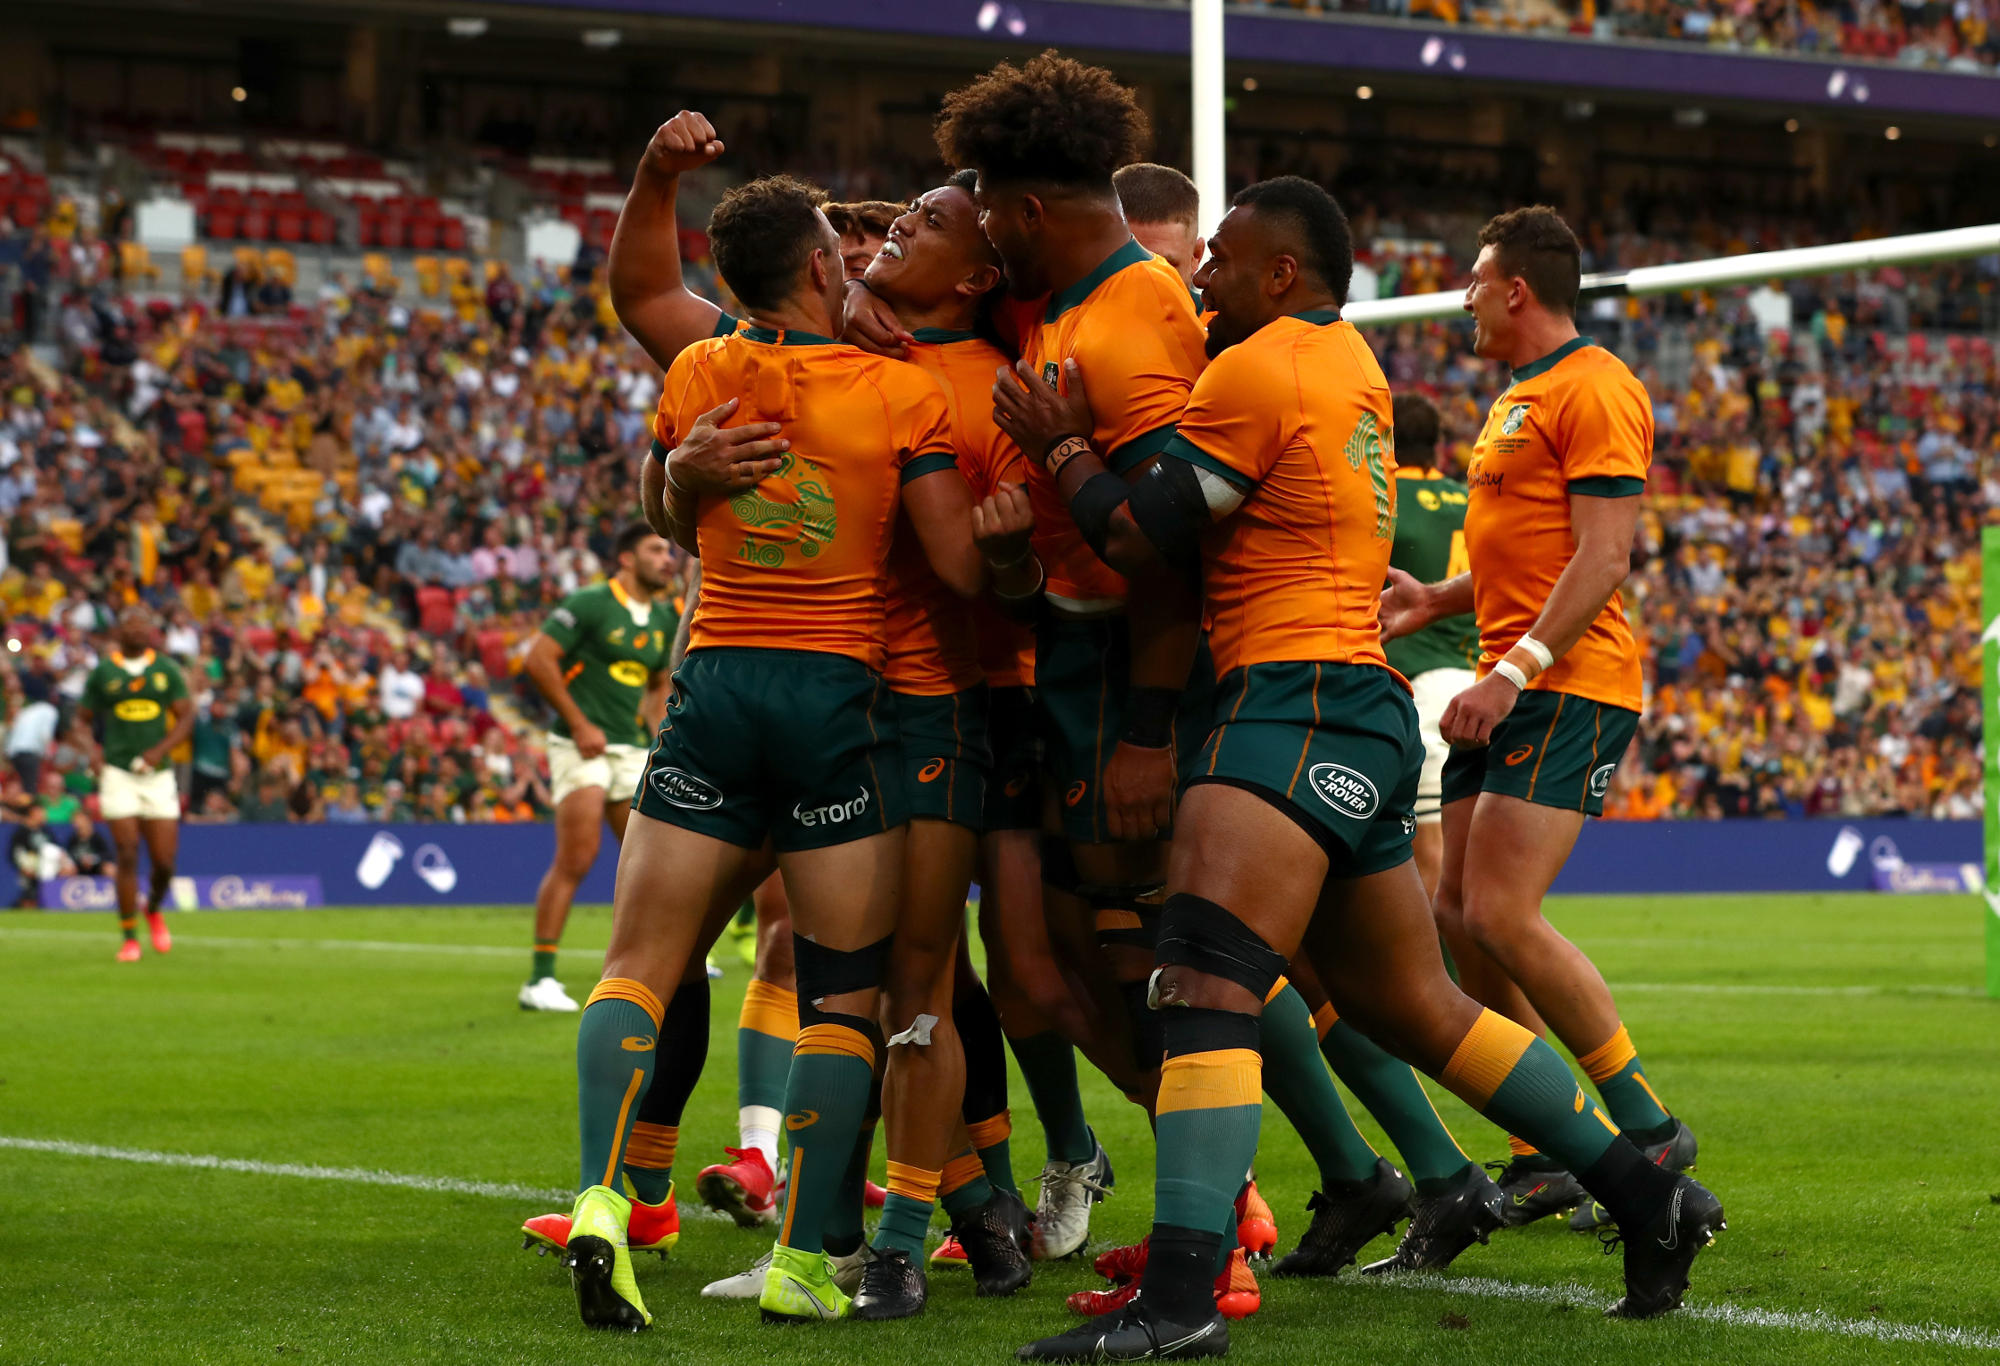 You are currently viewing To be or not to Wallaby? A question posed to Tier 2 by the Rennie-vation of Tier 1 rugby